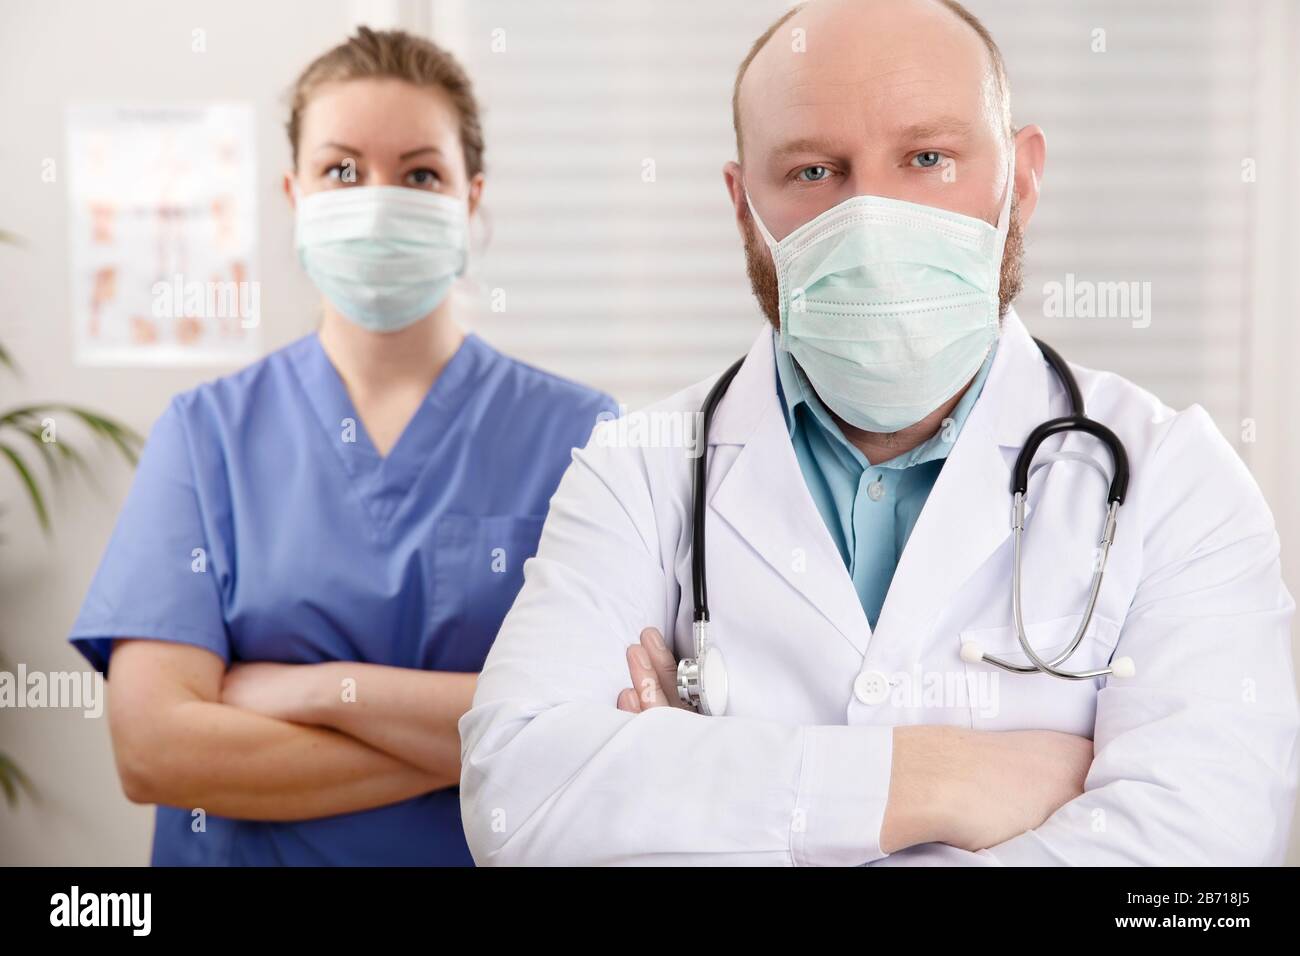 Portrait Of Confident Doctor And Nurse In Hospital Stock Photo